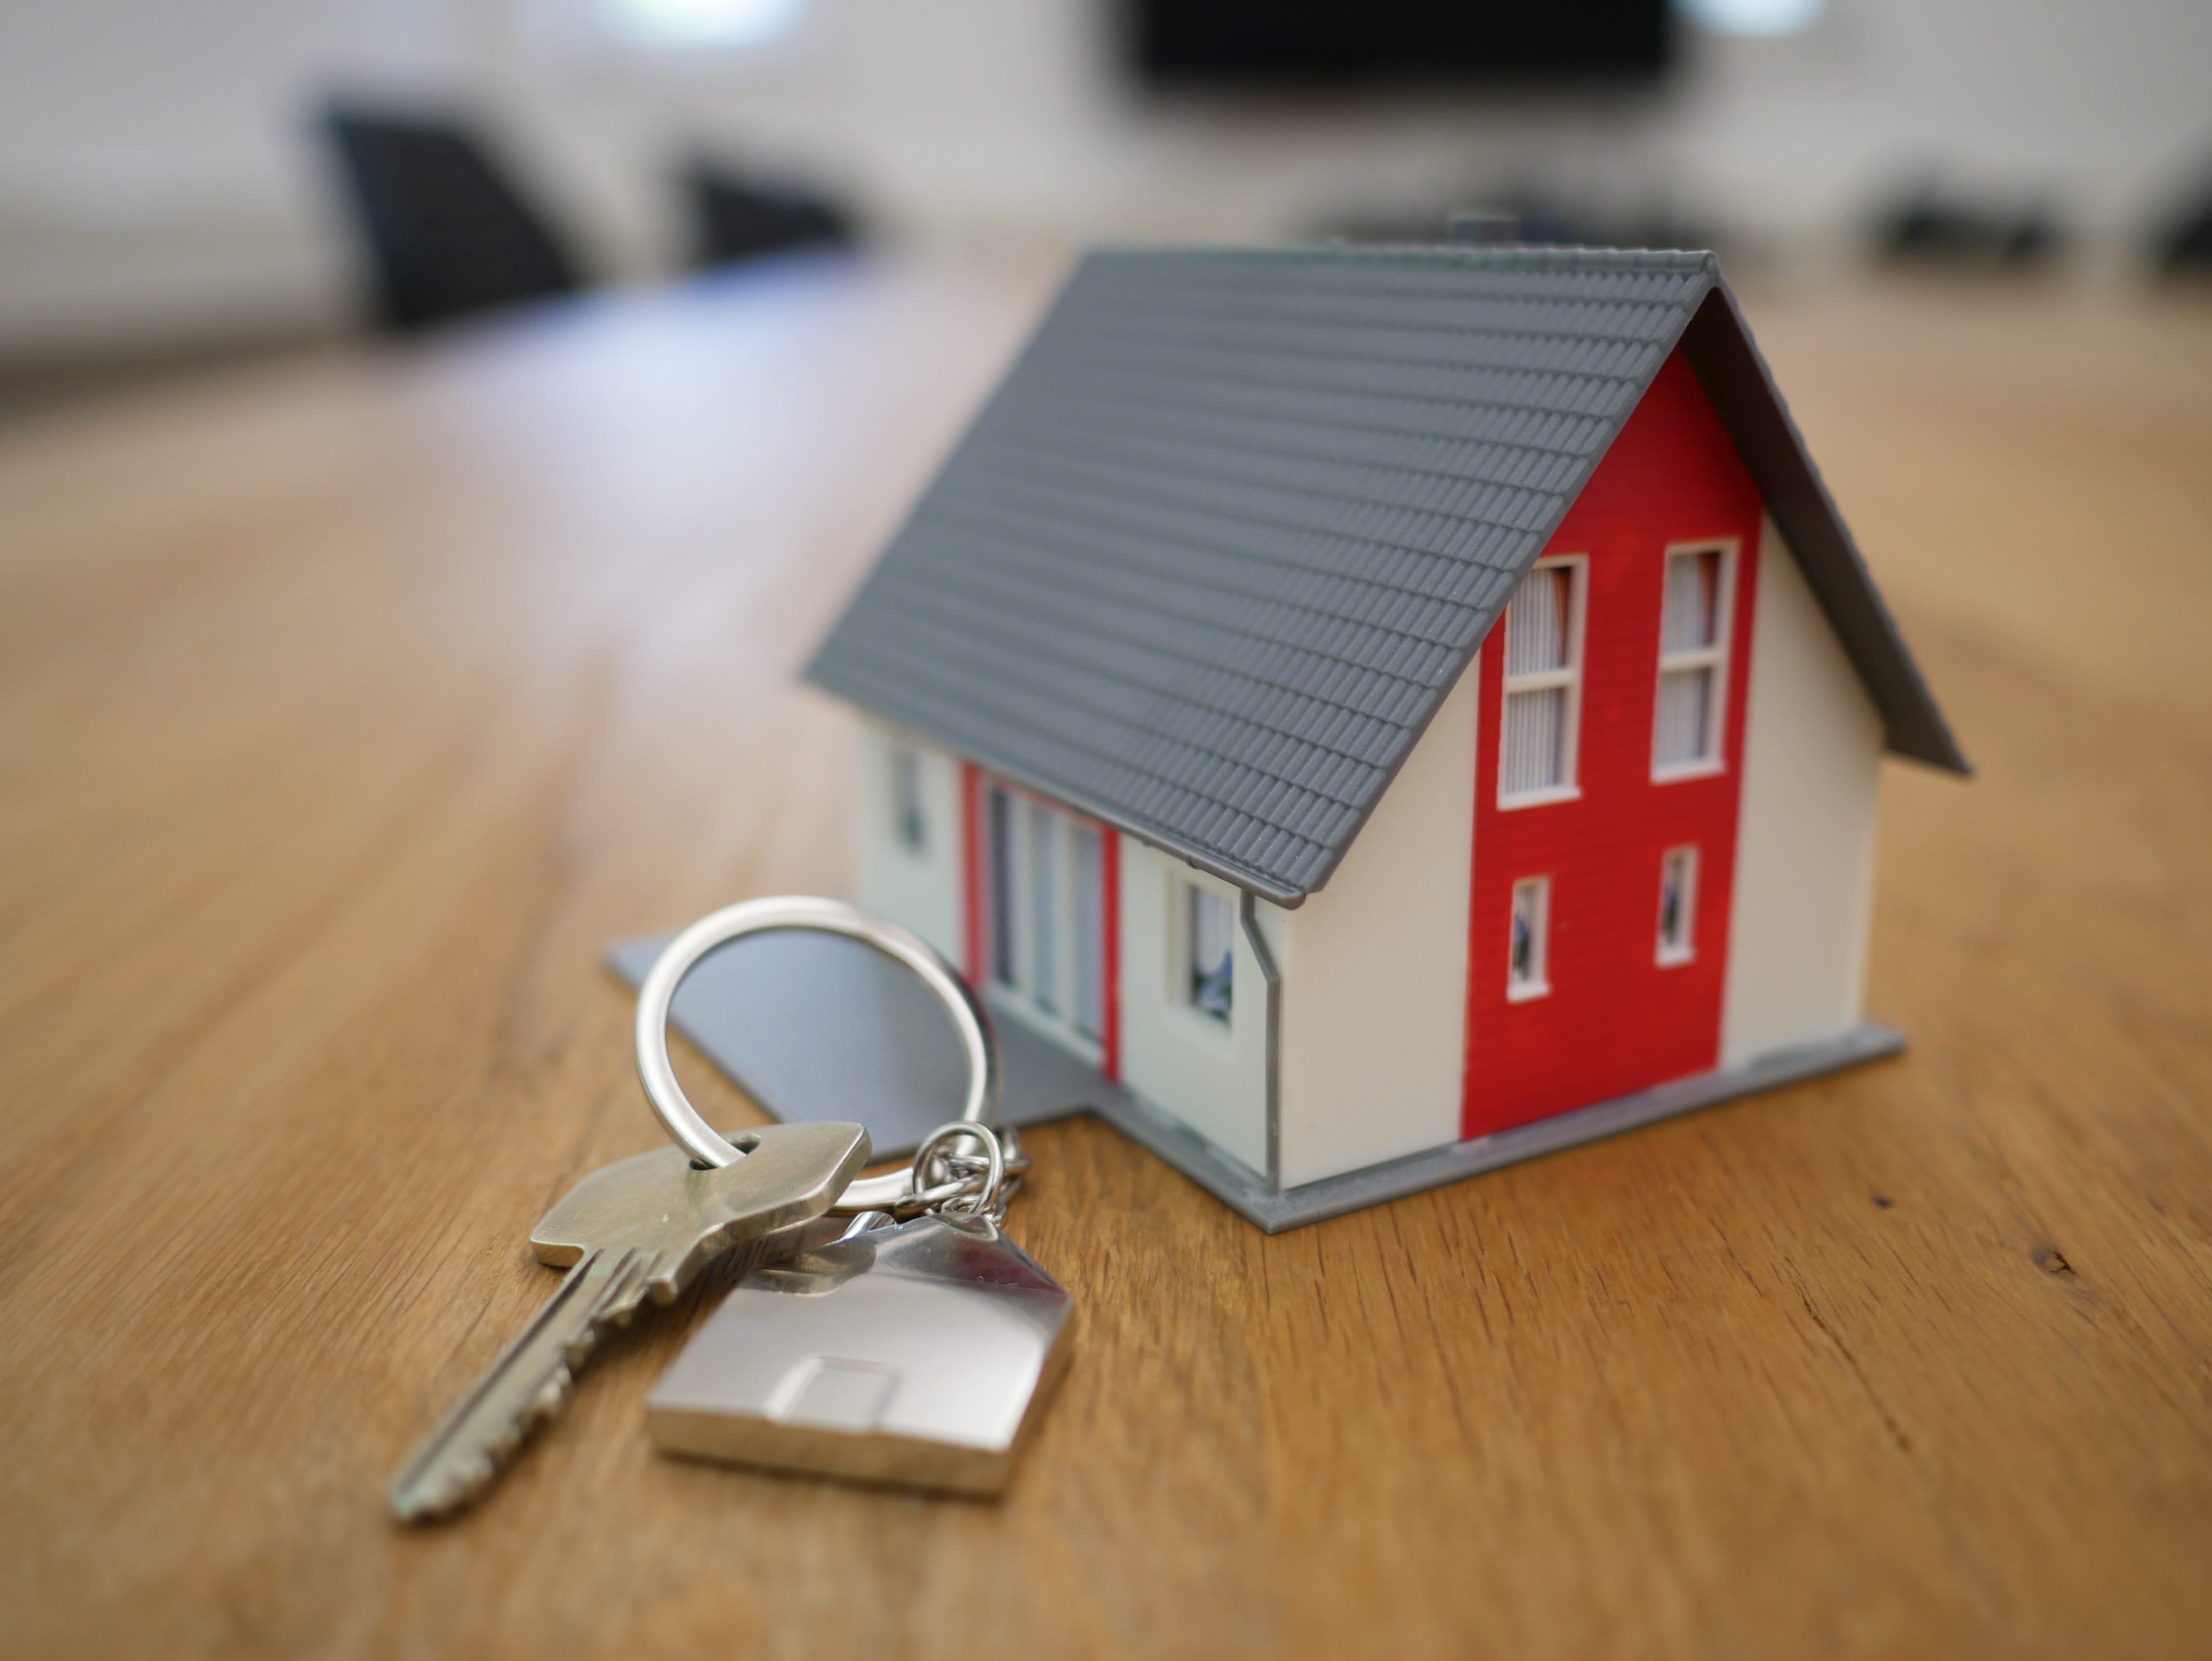 Red, white and grey toy house sitting on table next to house key on keyring shaped like a house; image by Tierra Mallorca, via Unsplash.com.